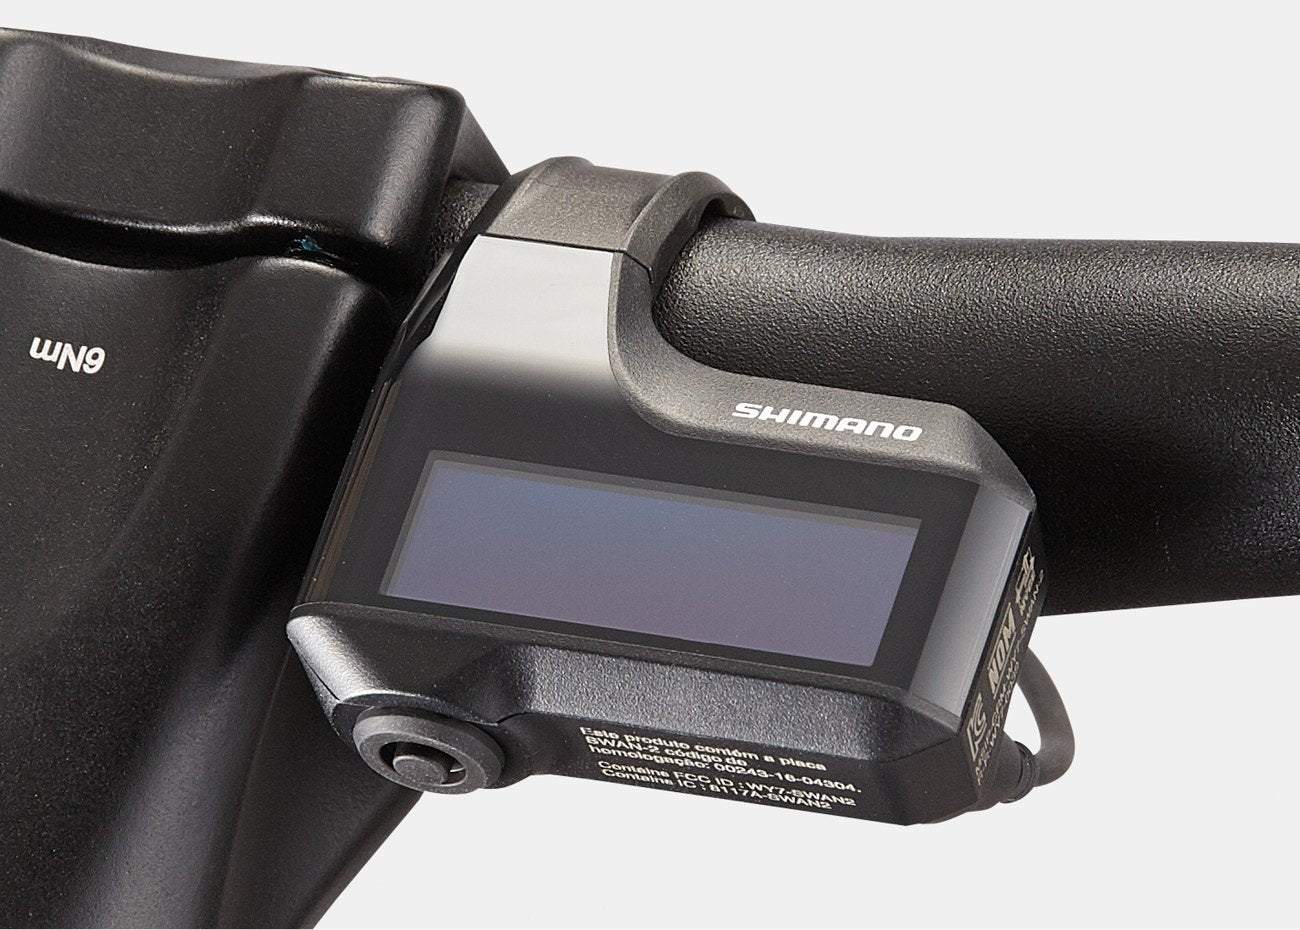 Turn off Shimano power on your electric bike